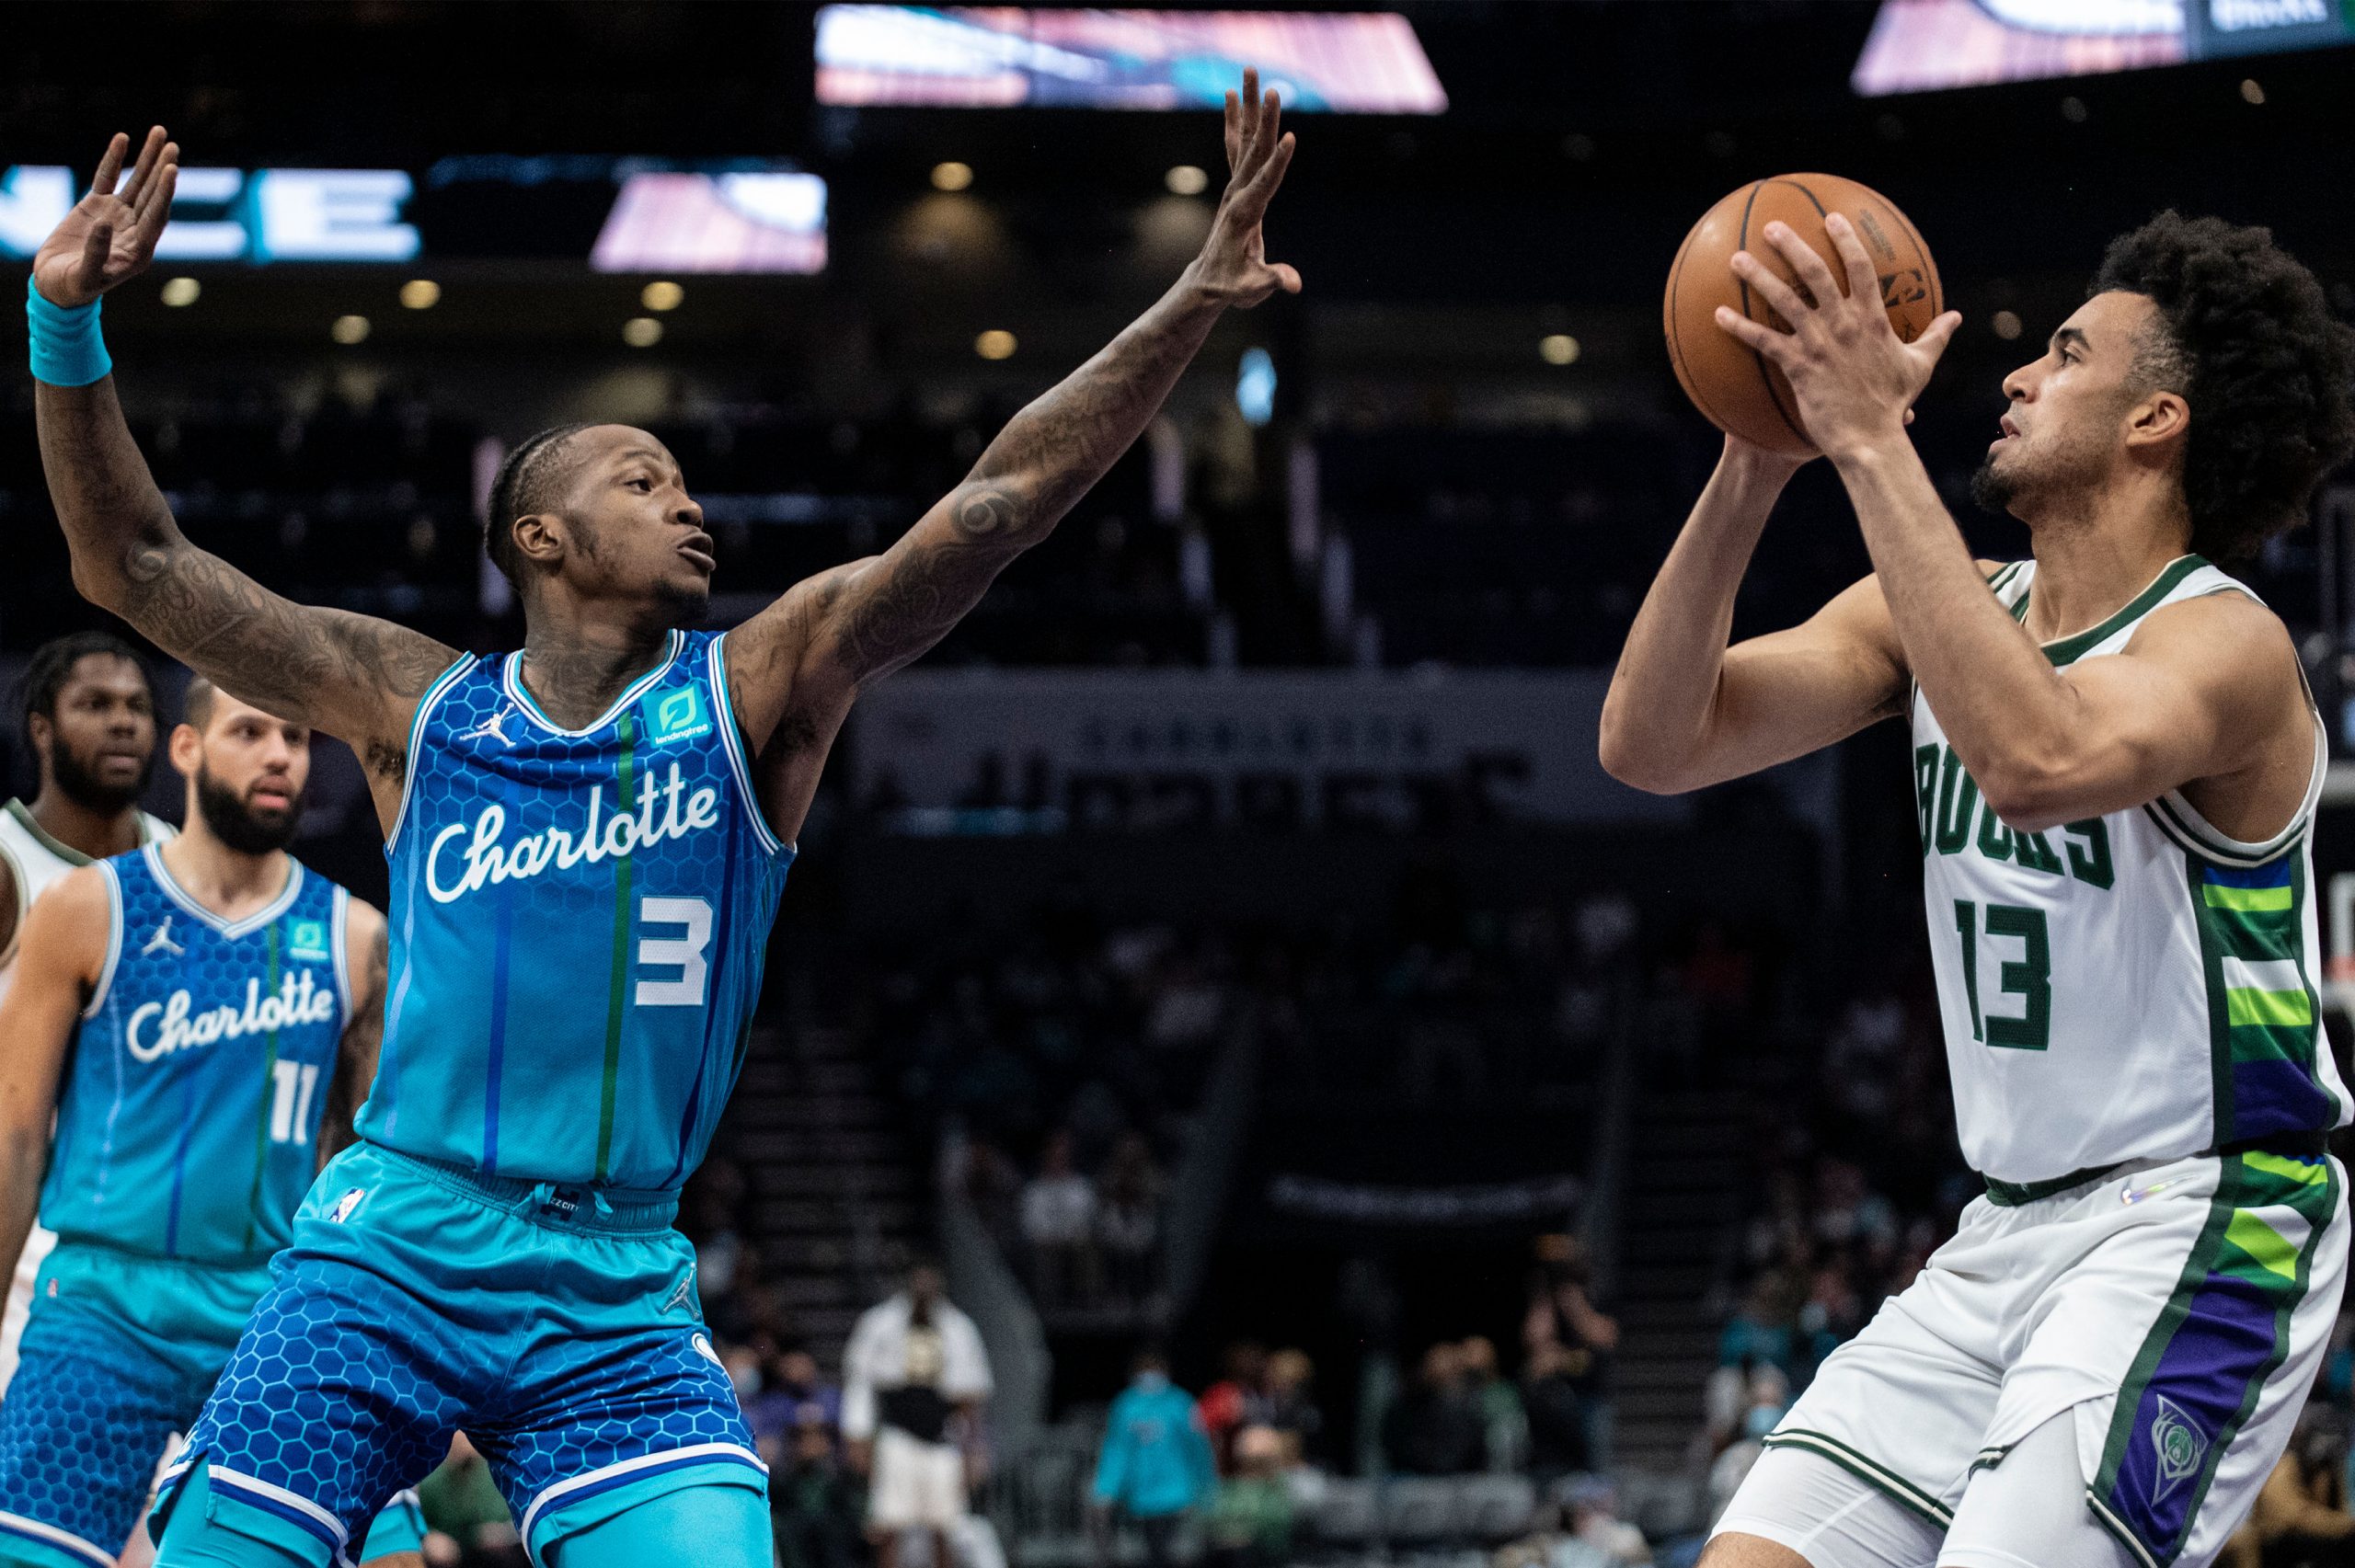 NBA: Rozier, Hornets down Bucks 114-106 for champs’ 3rd loss in last 4 games